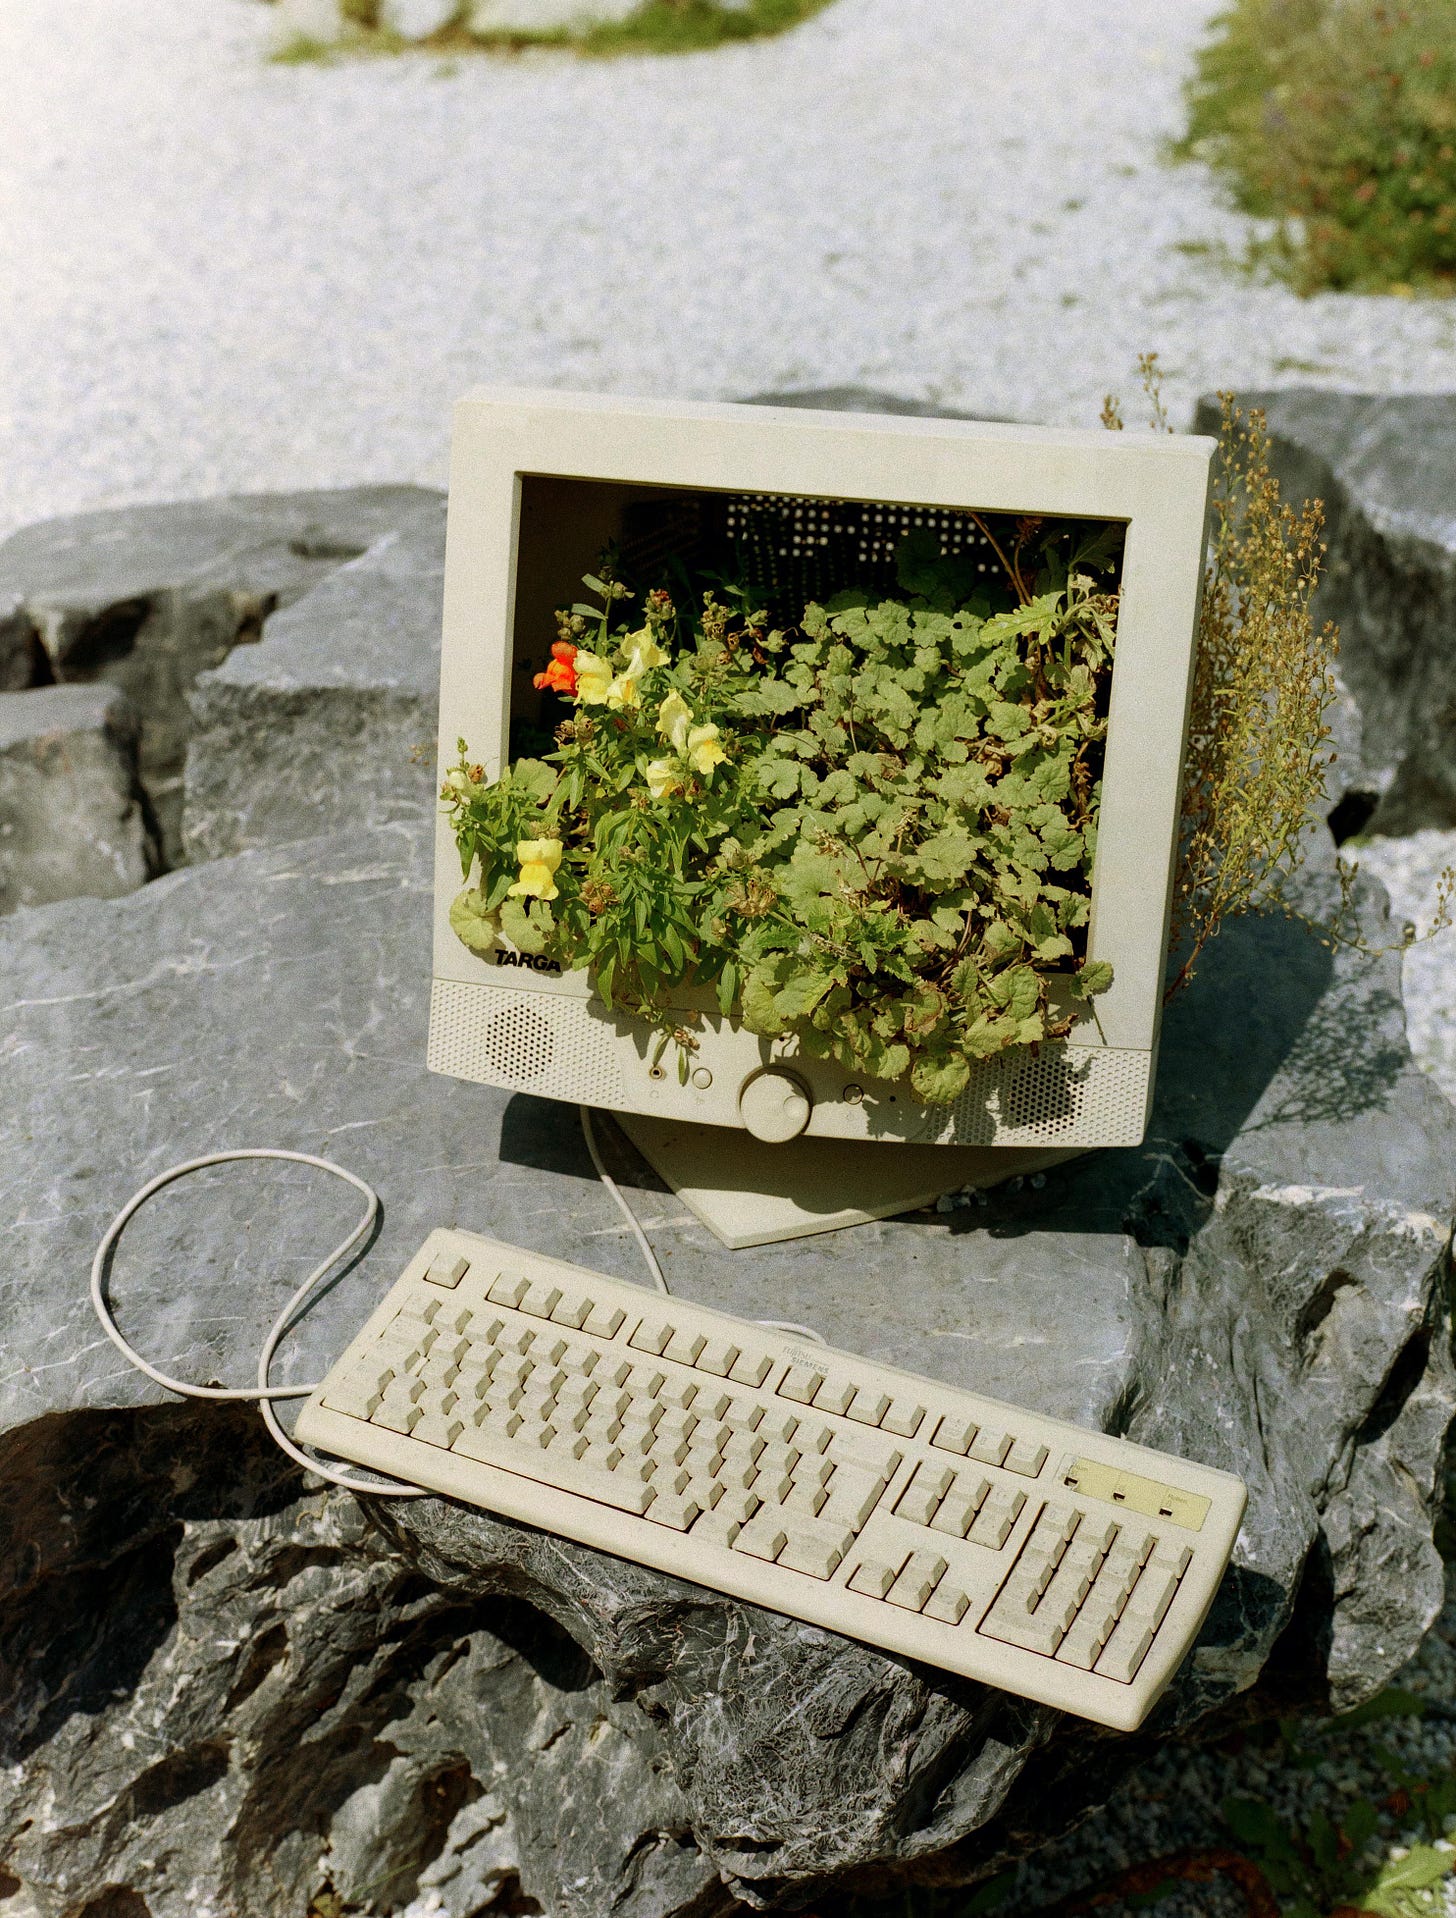 An image of a cream colored desktop with plant life growing out of the monitor. Keyboard is attached via cord and the desktop sits on a large flat top dark gray boulder. 